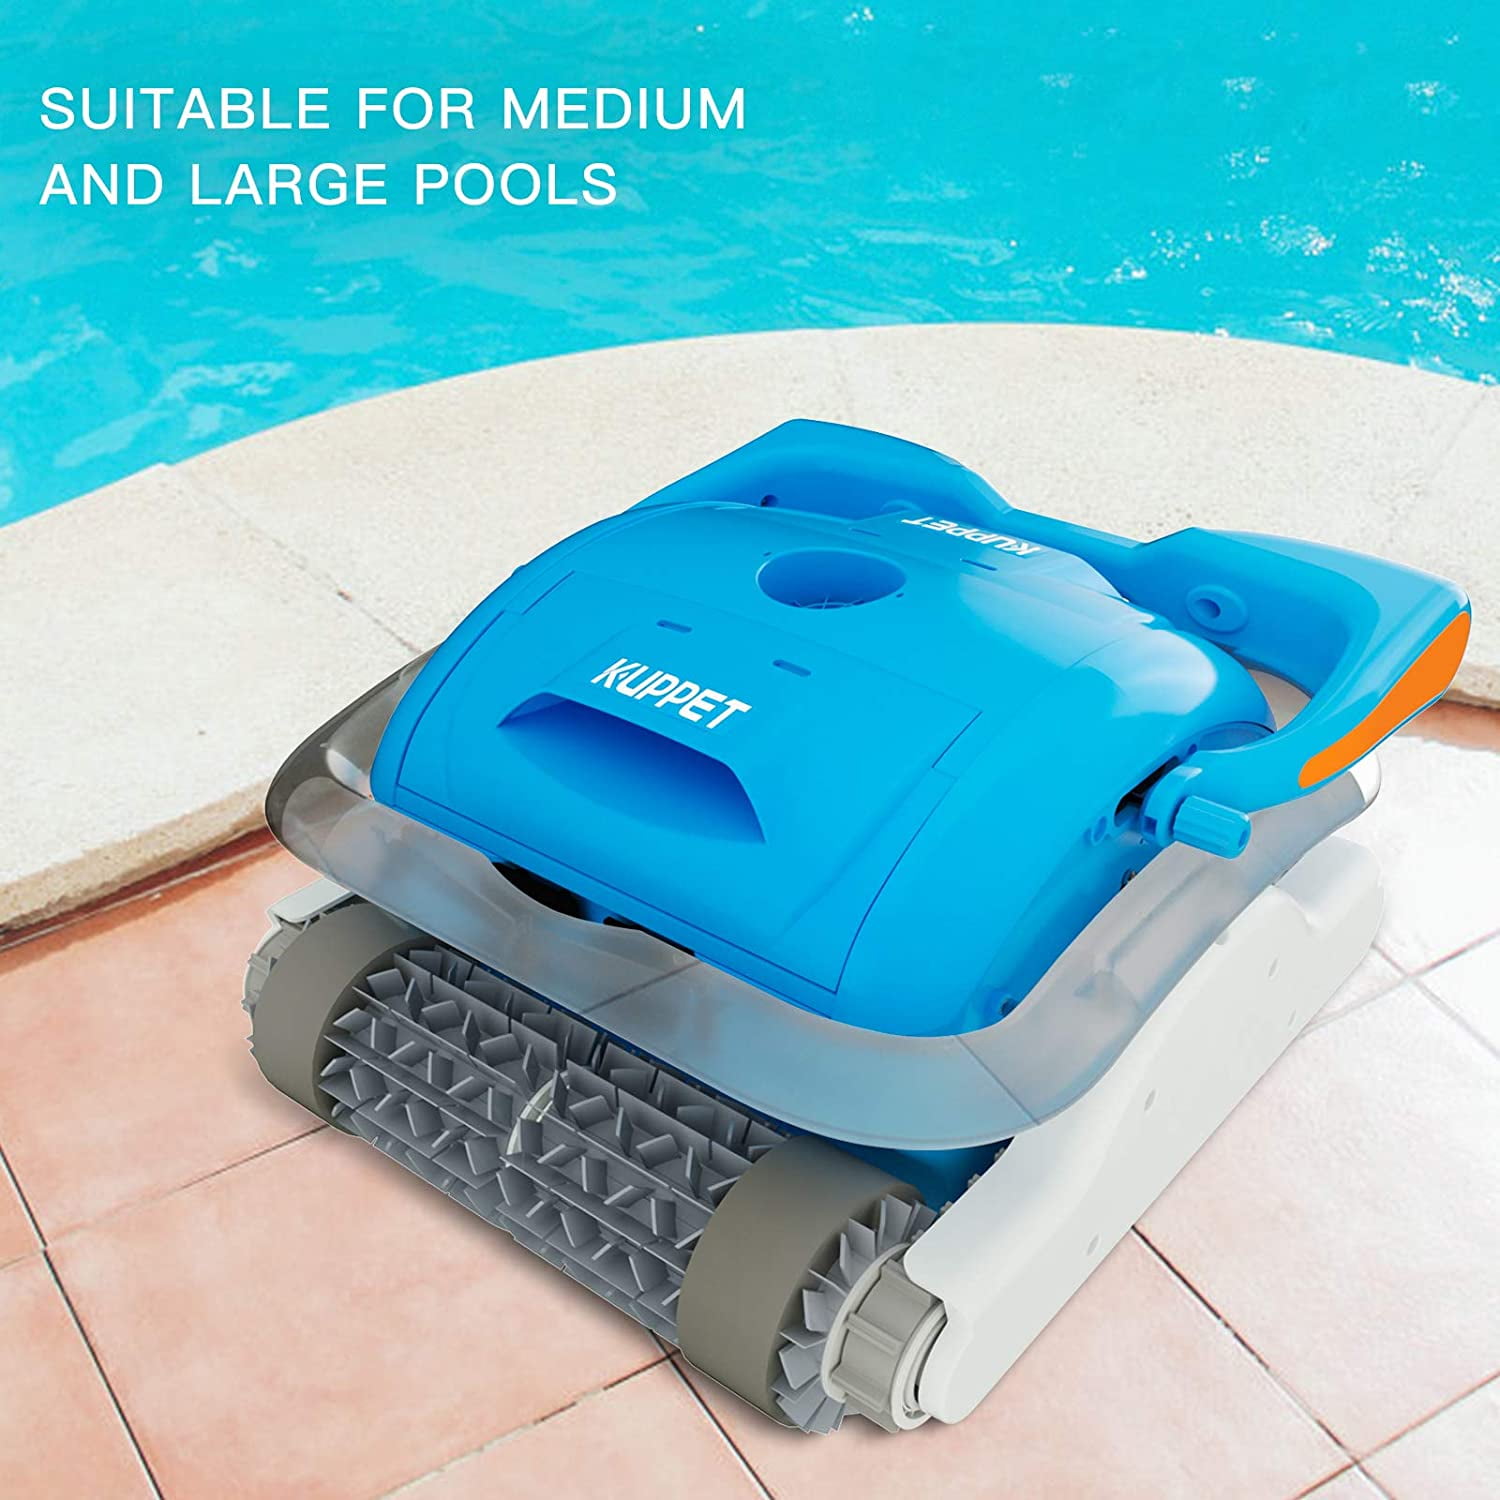 Pool Cleaner with Large Filter Basket and Tangle-Free Swivel Cord for Swimming Pool Debris KUPPET Professional Automatic Pool Vacuum Cleaner Cleans Floors Walls and Steps 600